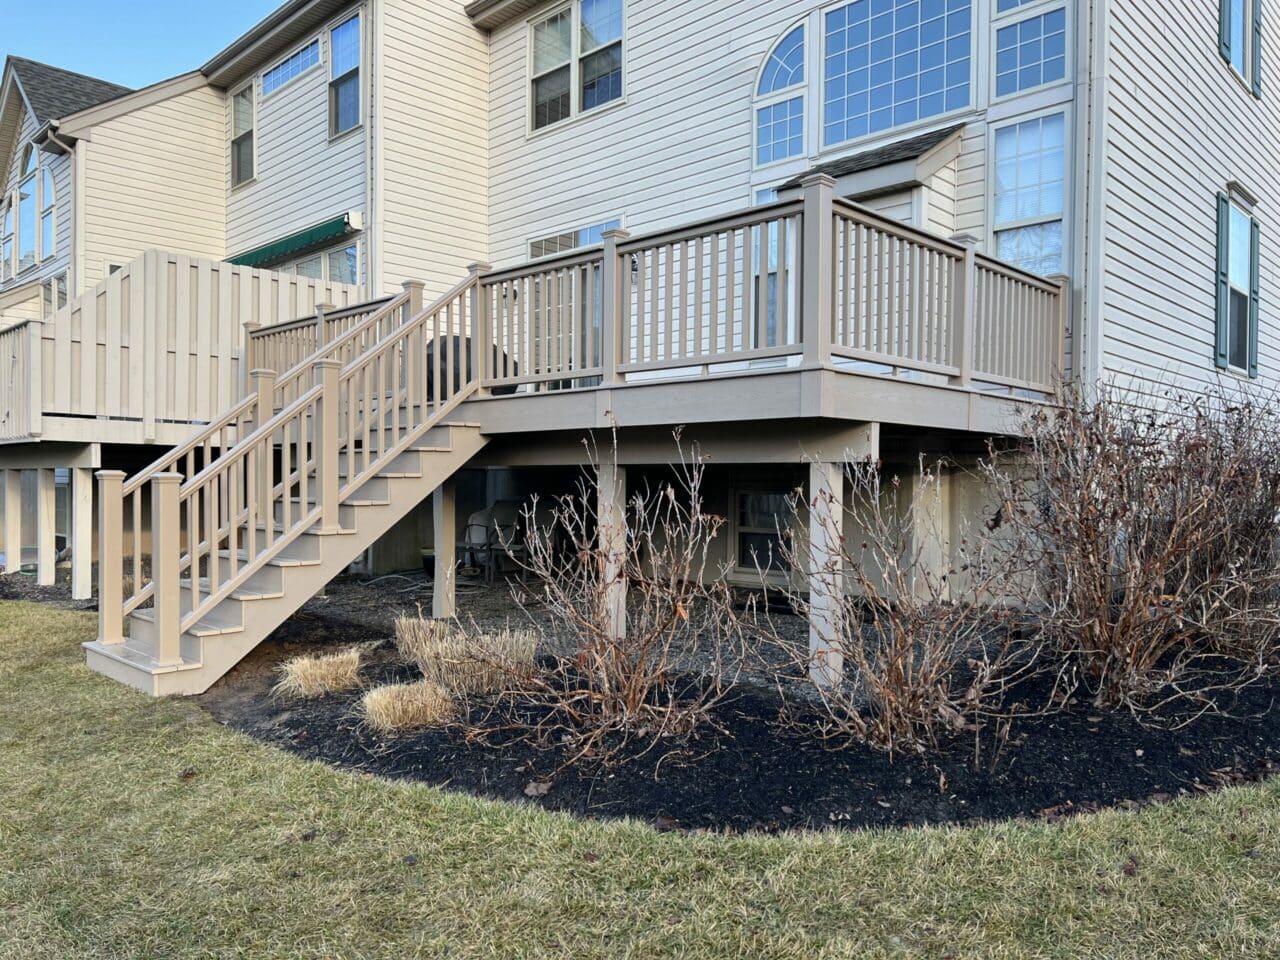 Photo of an elevated composite deck with railing